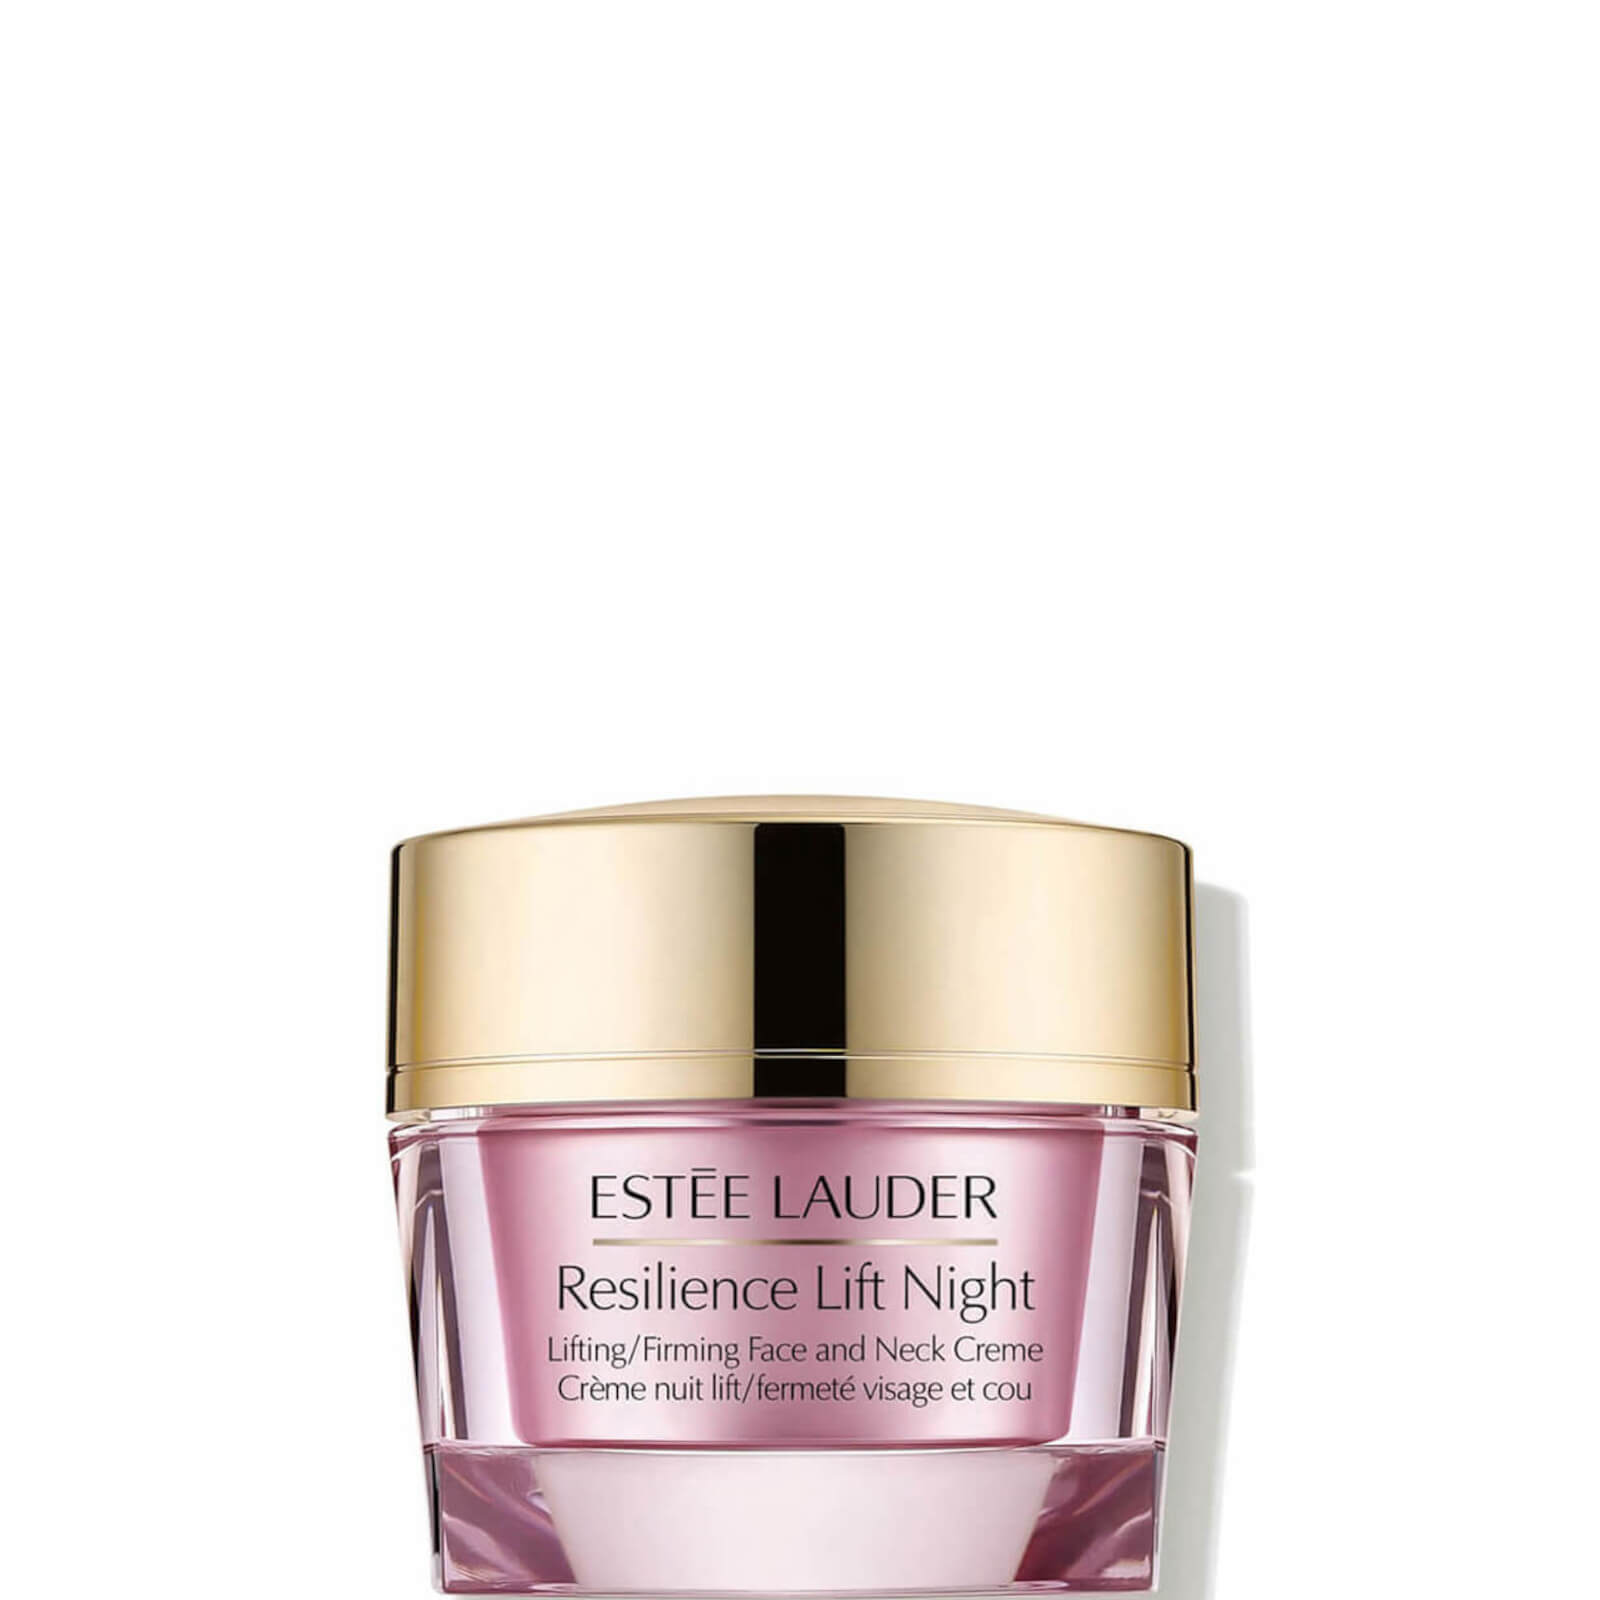 Estee Lauder Resilience Lift Night Lifting/Firming Face and Neck Creme 50ml